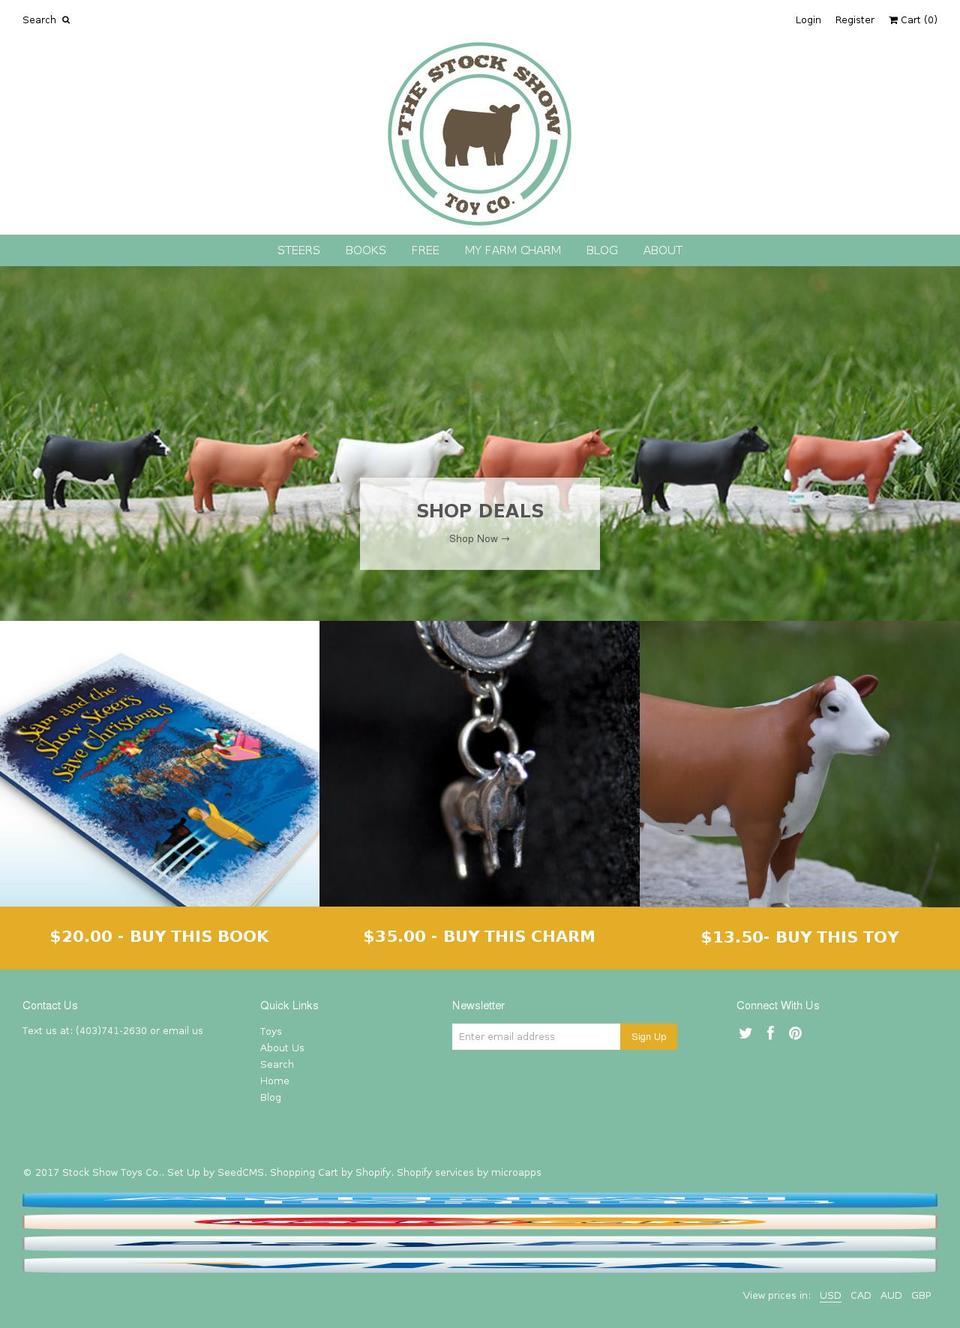 Weekend Shopify theme site example stockshowtoy.com